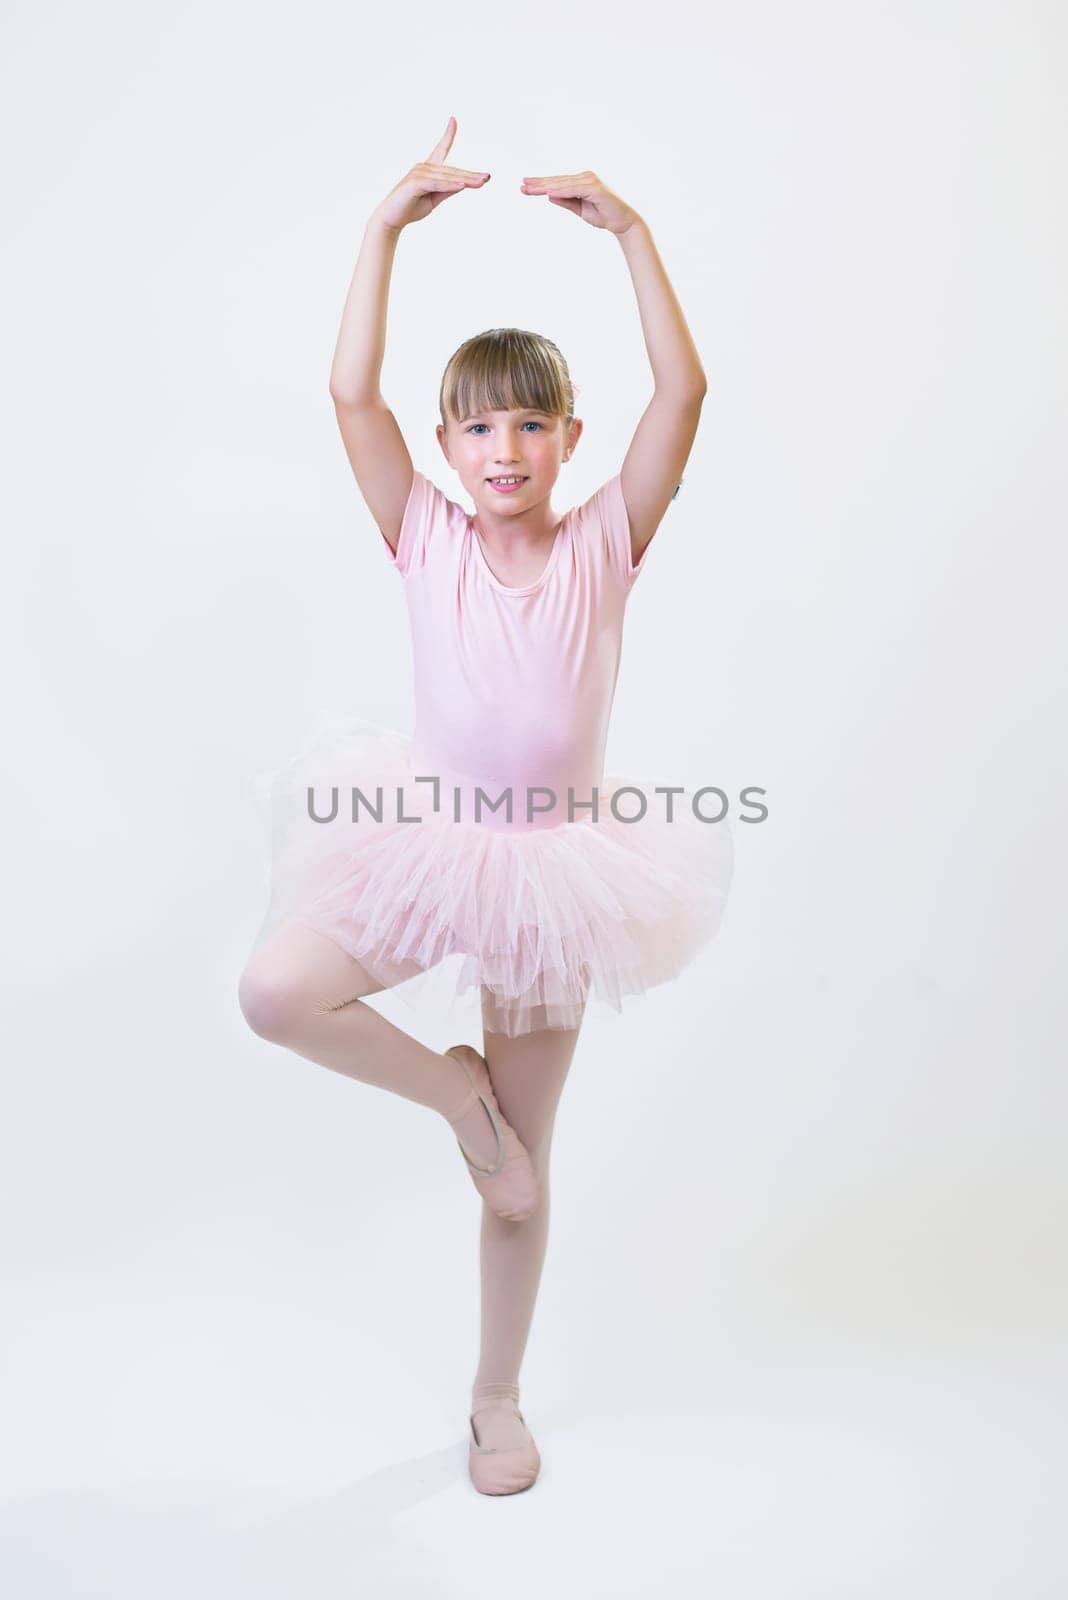 Little ballerina dancer in a pink tutu academy student posing on white background by jcdiazhidalgo